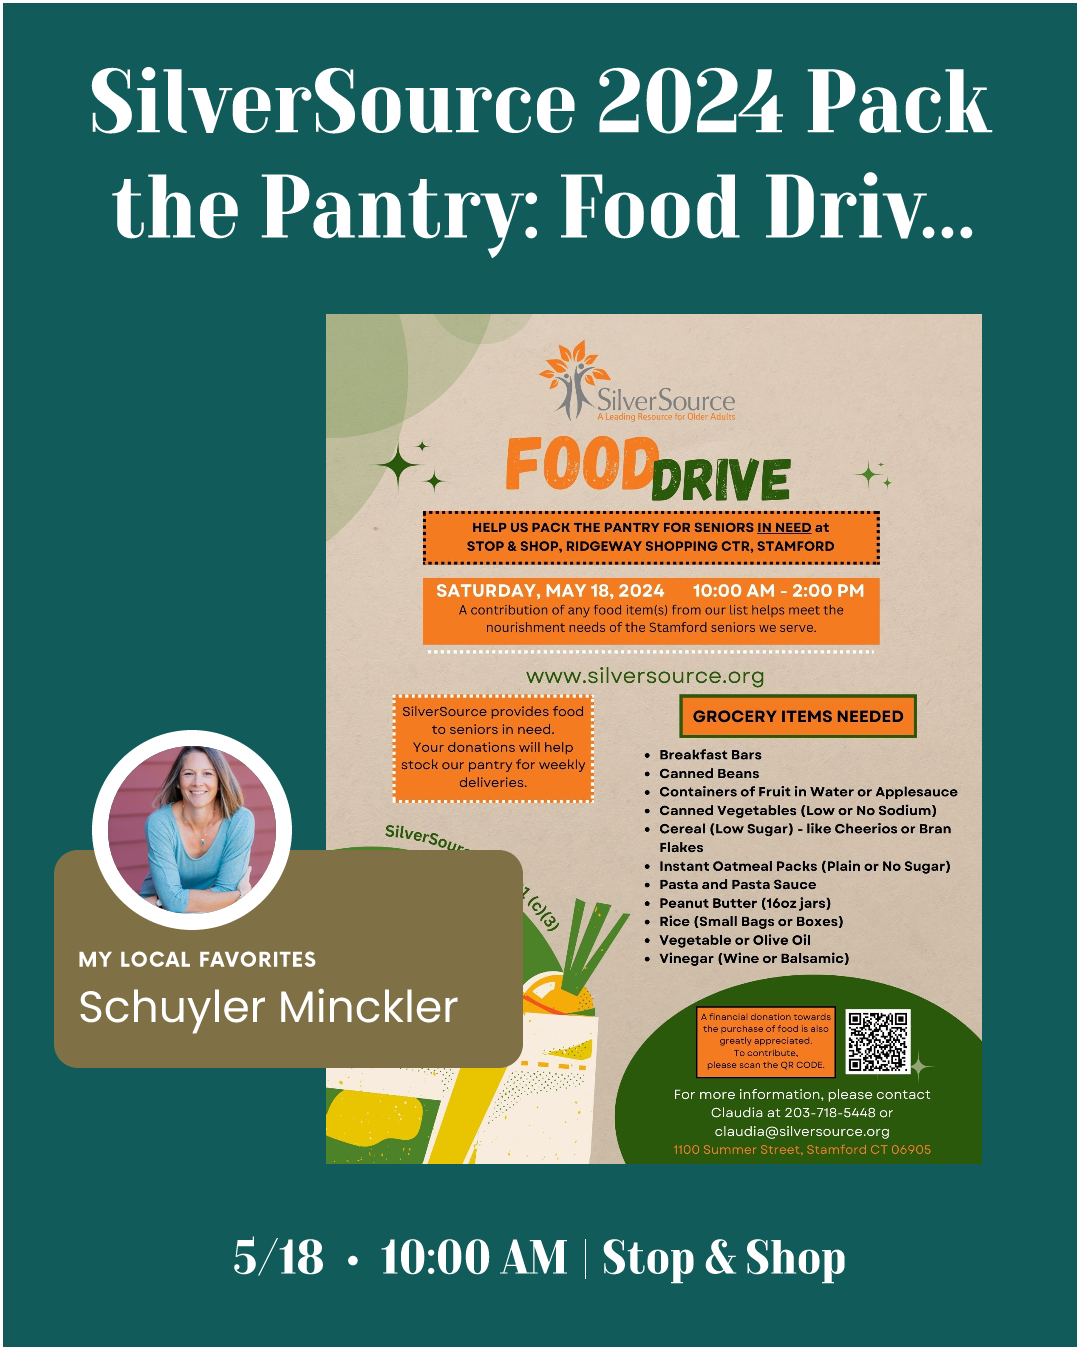 SilverSource 2024 Pack the Pantry: Food Drive in support of Seniors in Need